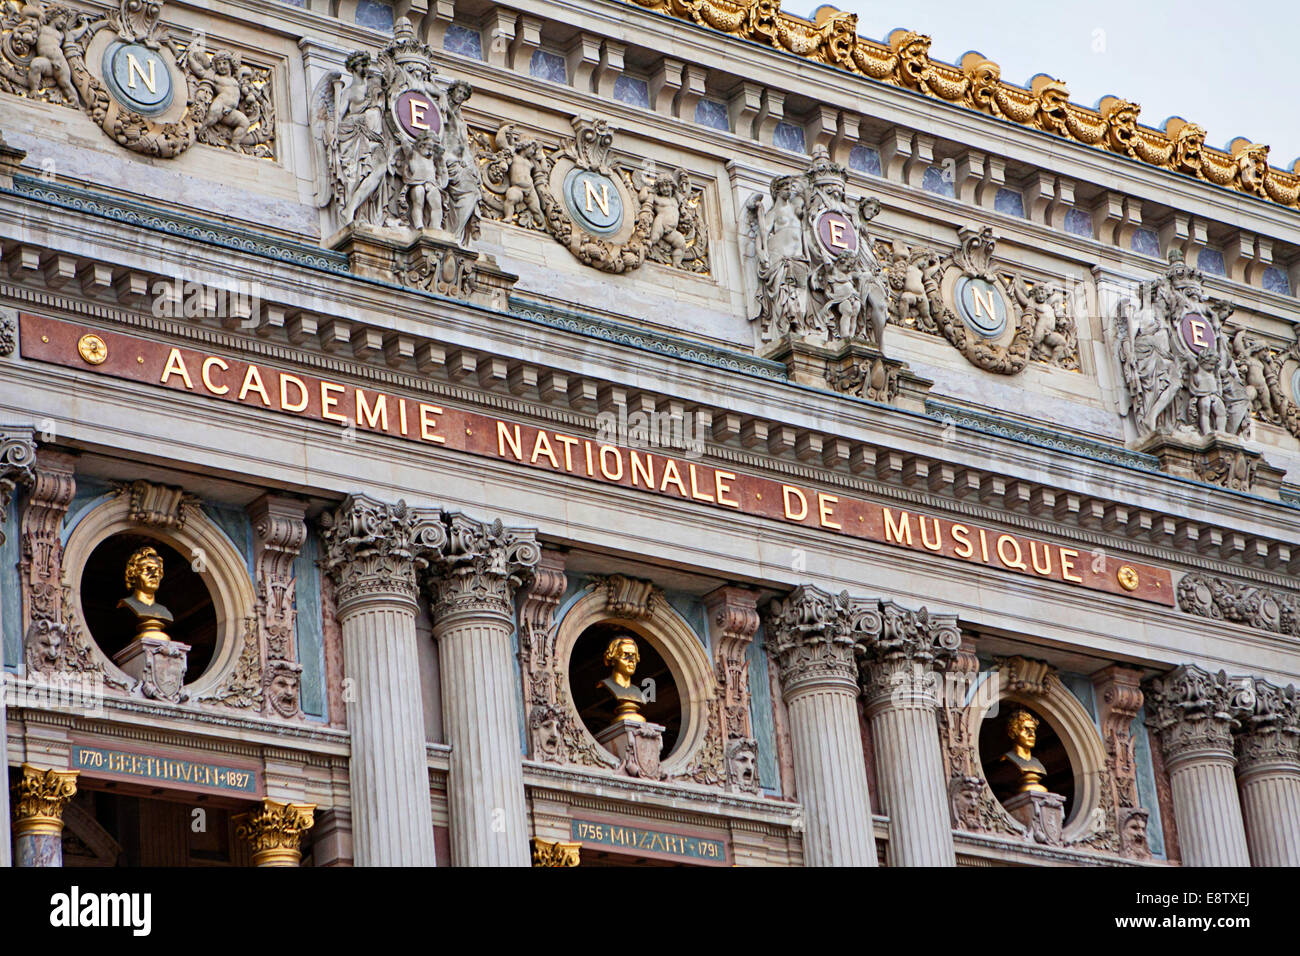 National Academy of Music, Paris, France Stock Photo